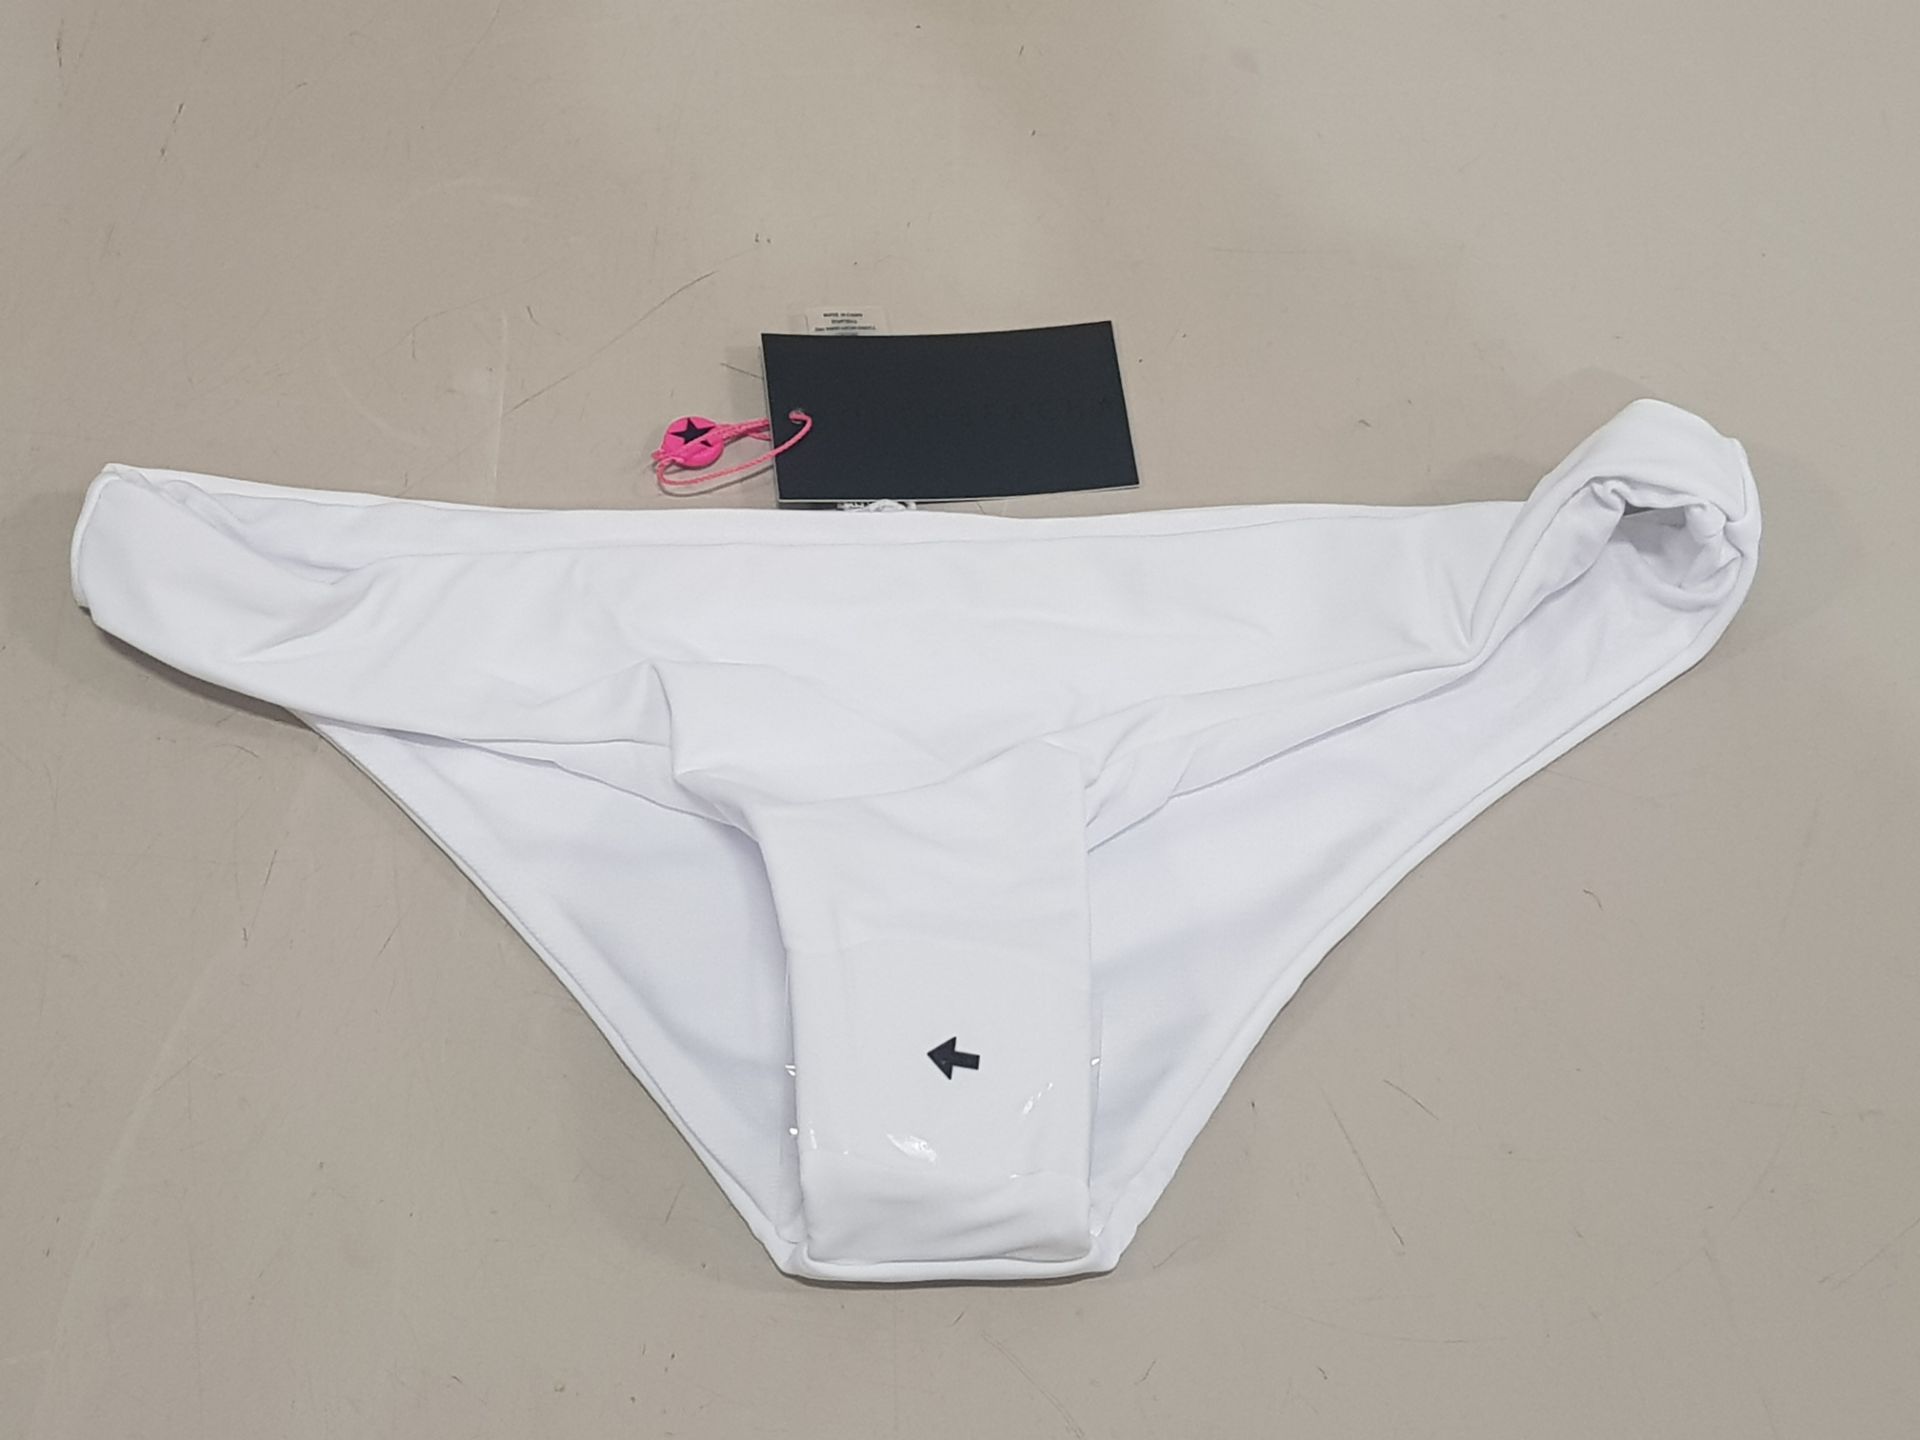 200 X BRAND NEW SOUTH BEACH MIX AND MATCH HIPSTER BIKINI BOTTOMS - ALL IN WHITE - ALL IN SIZE 12 AND